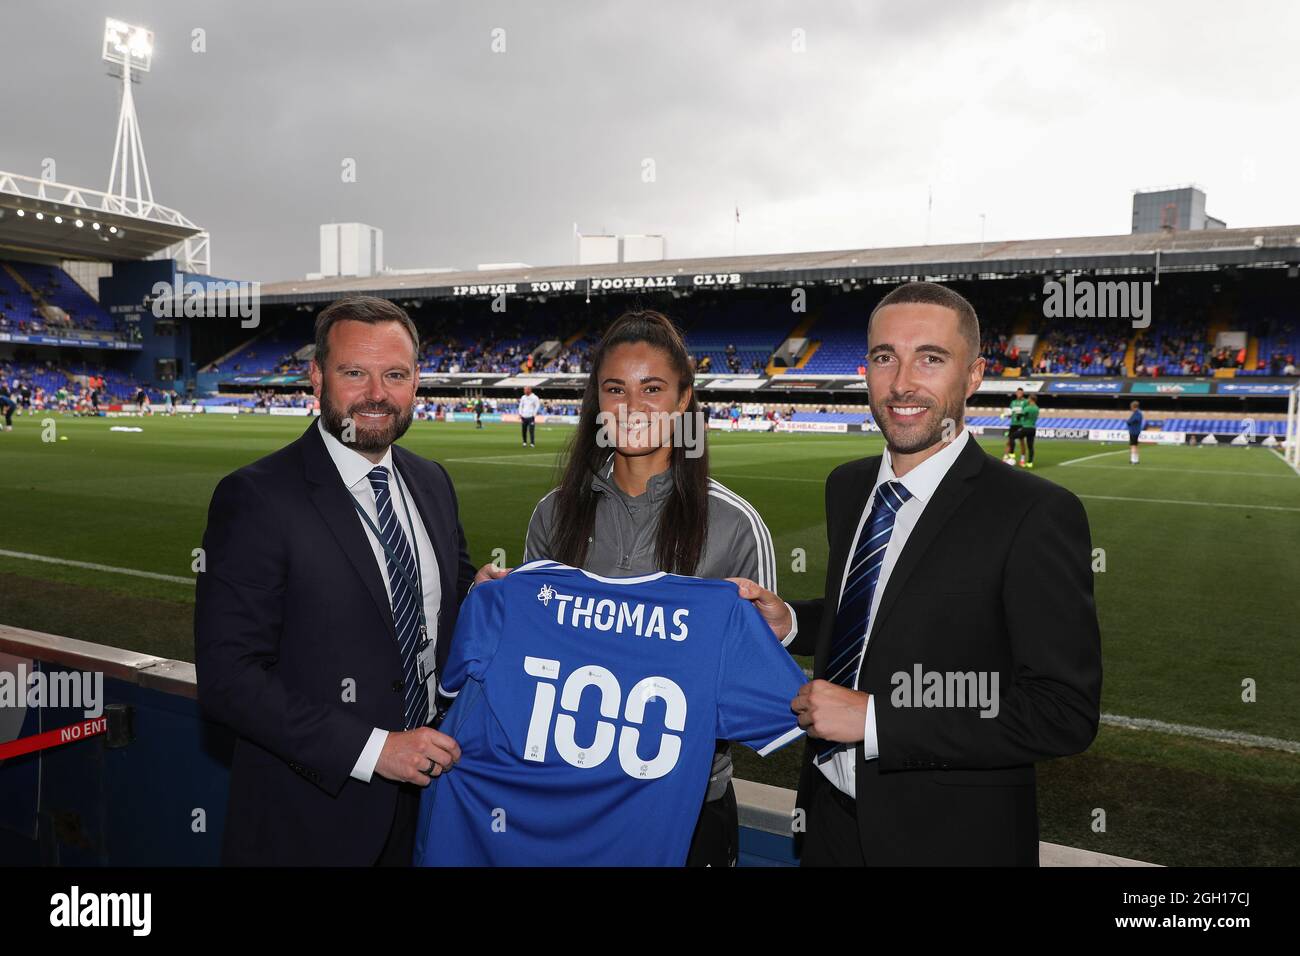 Natasha Thomas of Ipswich Town Women is presented with a shirt from CEO of Ipswich Town, Mark Ashton (L) and Ipswich Town Women Manager, Joe Sheehan (R) pre match on achieving 100 goals for the club - Ipswich Town v AFC Wimbledon, Sky Bet League One, Portman Road, Ipswich, UK - 28th August 2021  Editorial Use Only - DataCo restrictions apply Stock Photo